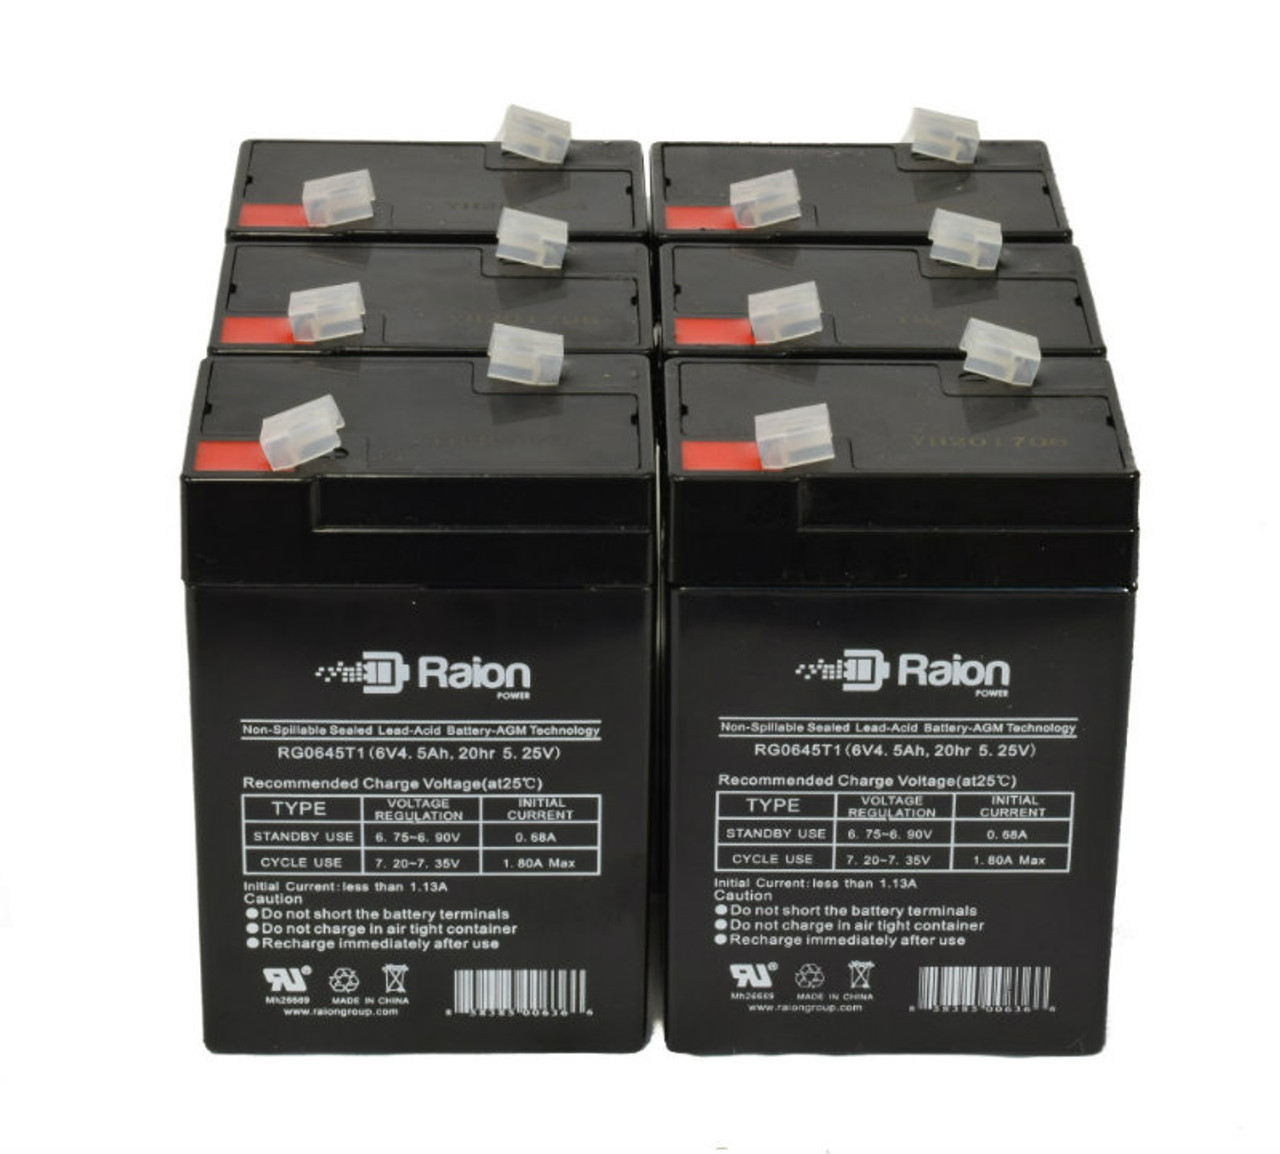 Raion Power 6 Volt 4.5Ah RG0645T1 Replacement Battery for Wing ES 4-6 - 6 Pack